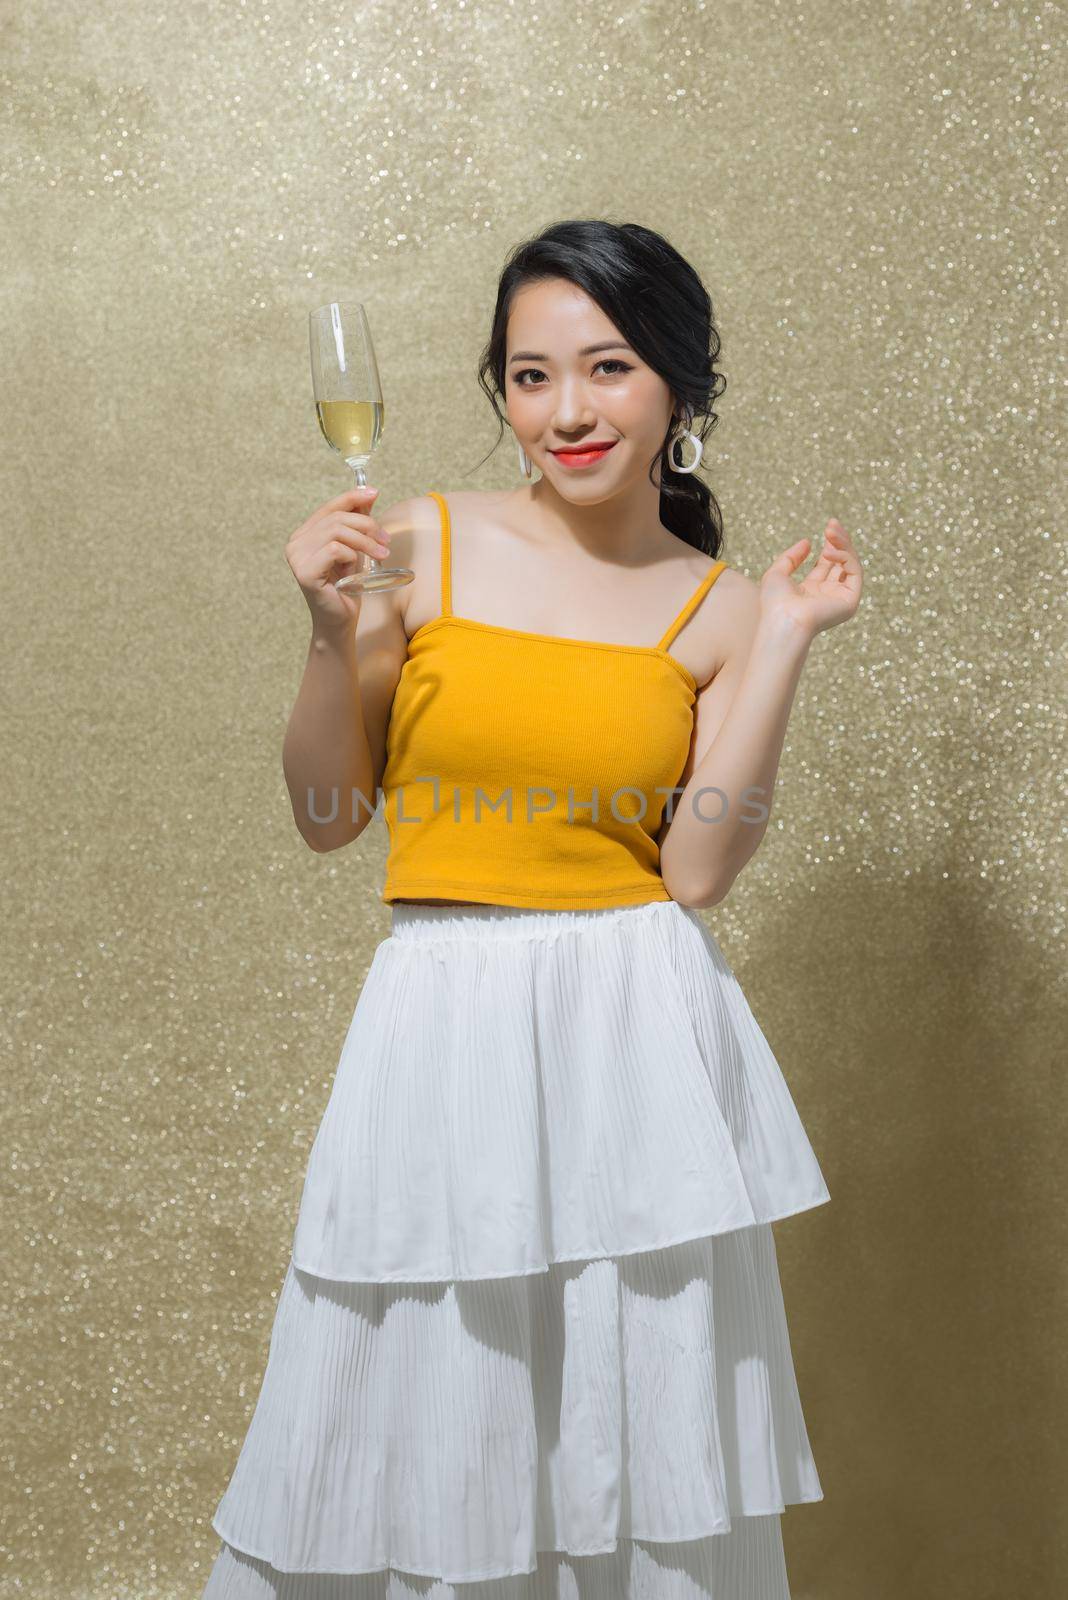 One young and beautiful woman dancing with glass of champagne and smiling. Party concept by makidotvn